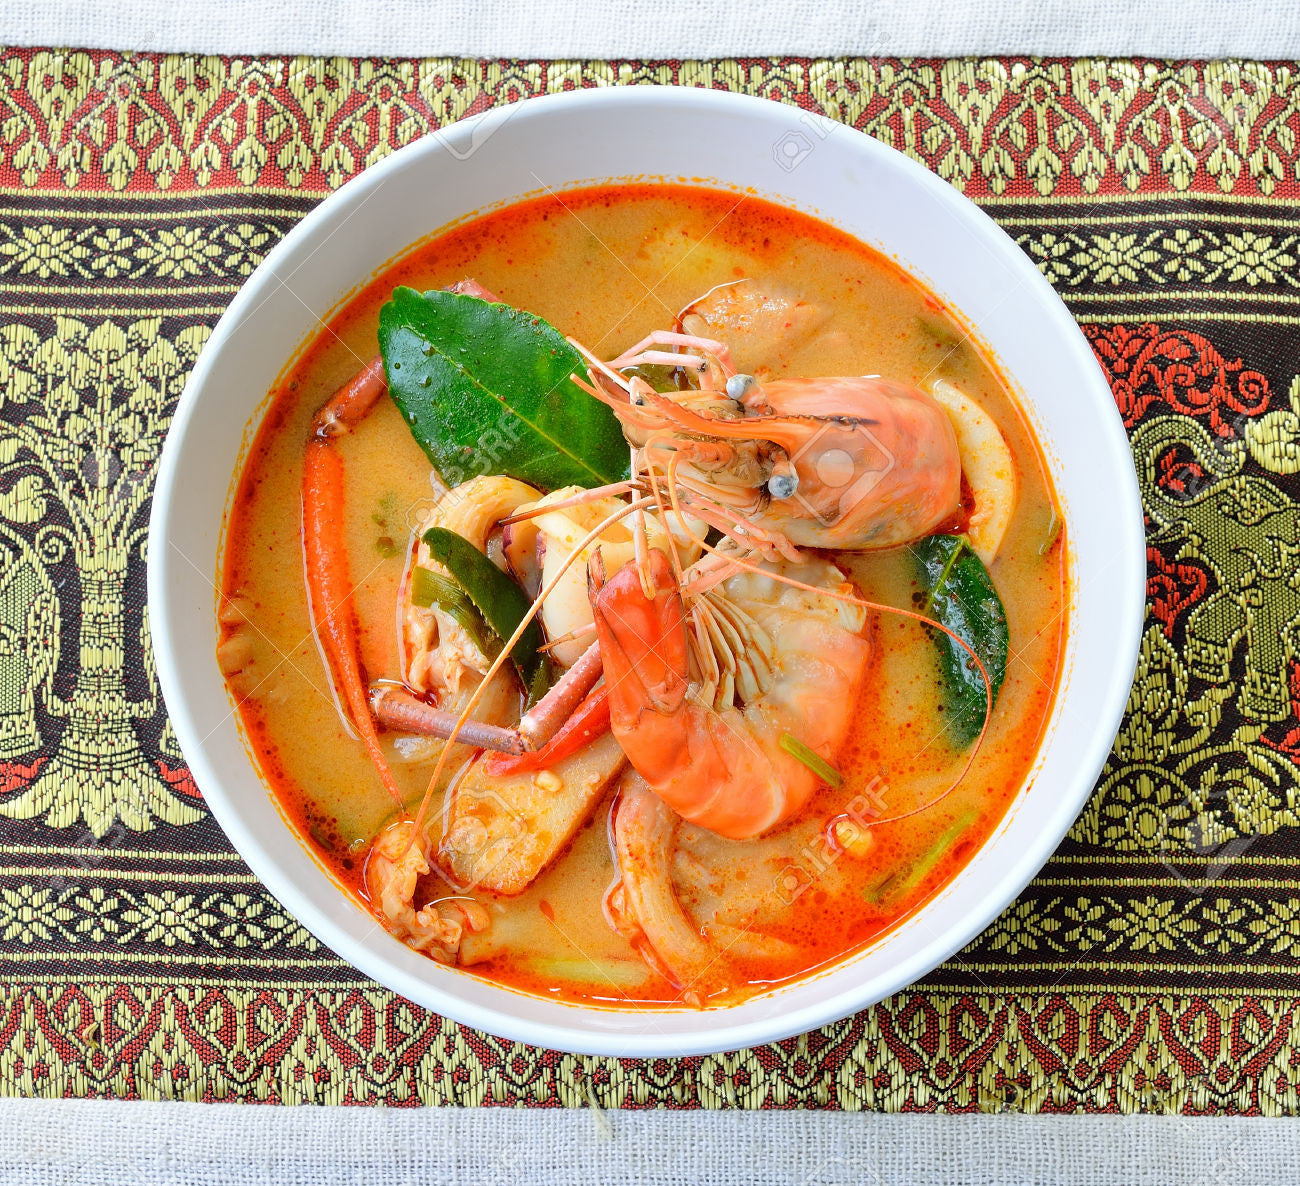 January 2017 Recipe of the Month - Tom Yum Goong: Lemongrass Soup with Shrimp